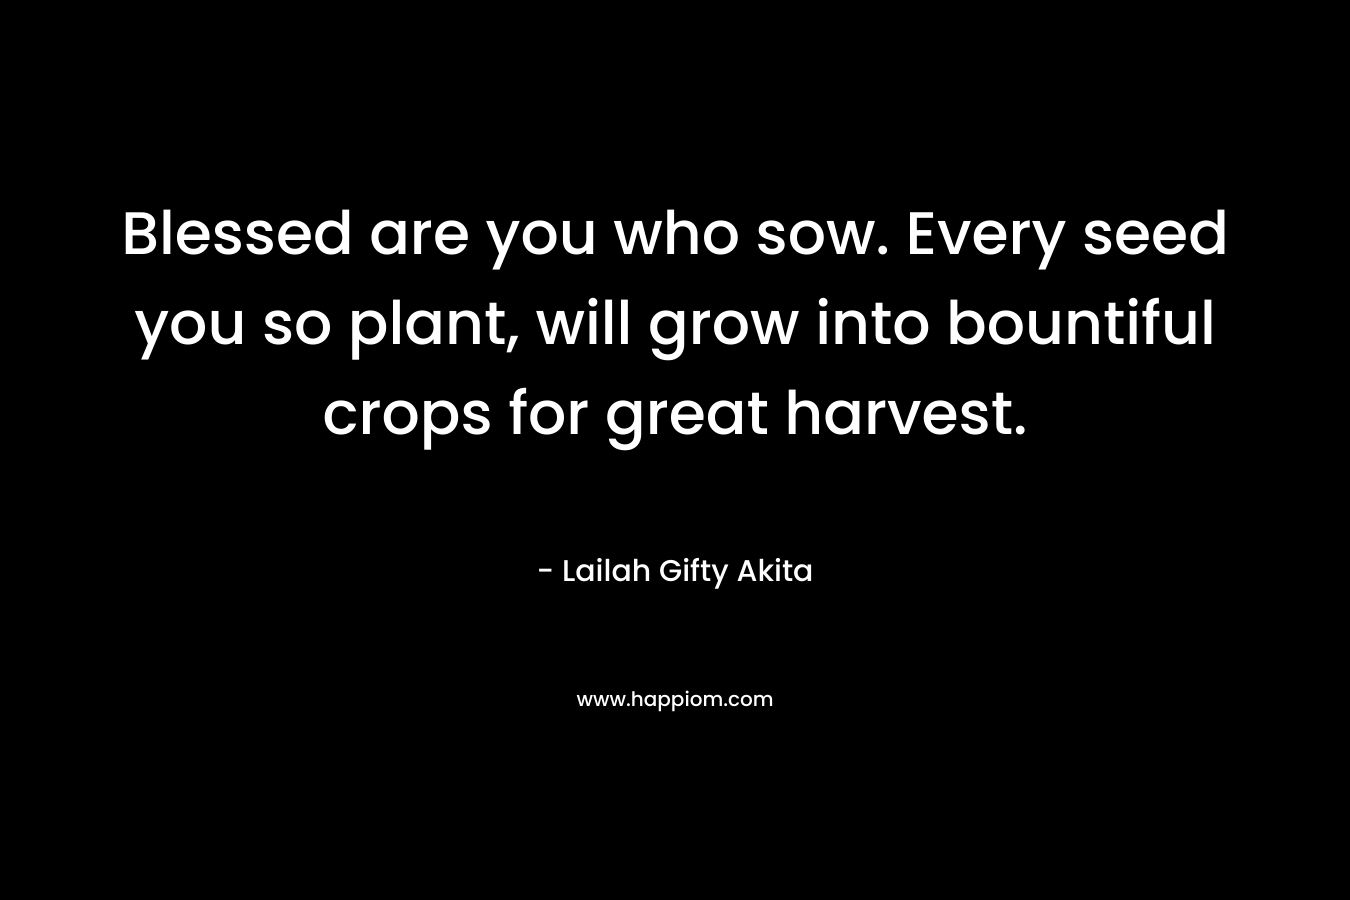 Blessed are you who sow. Every seed you so plant, will grow into bountiful crops for great harvest.